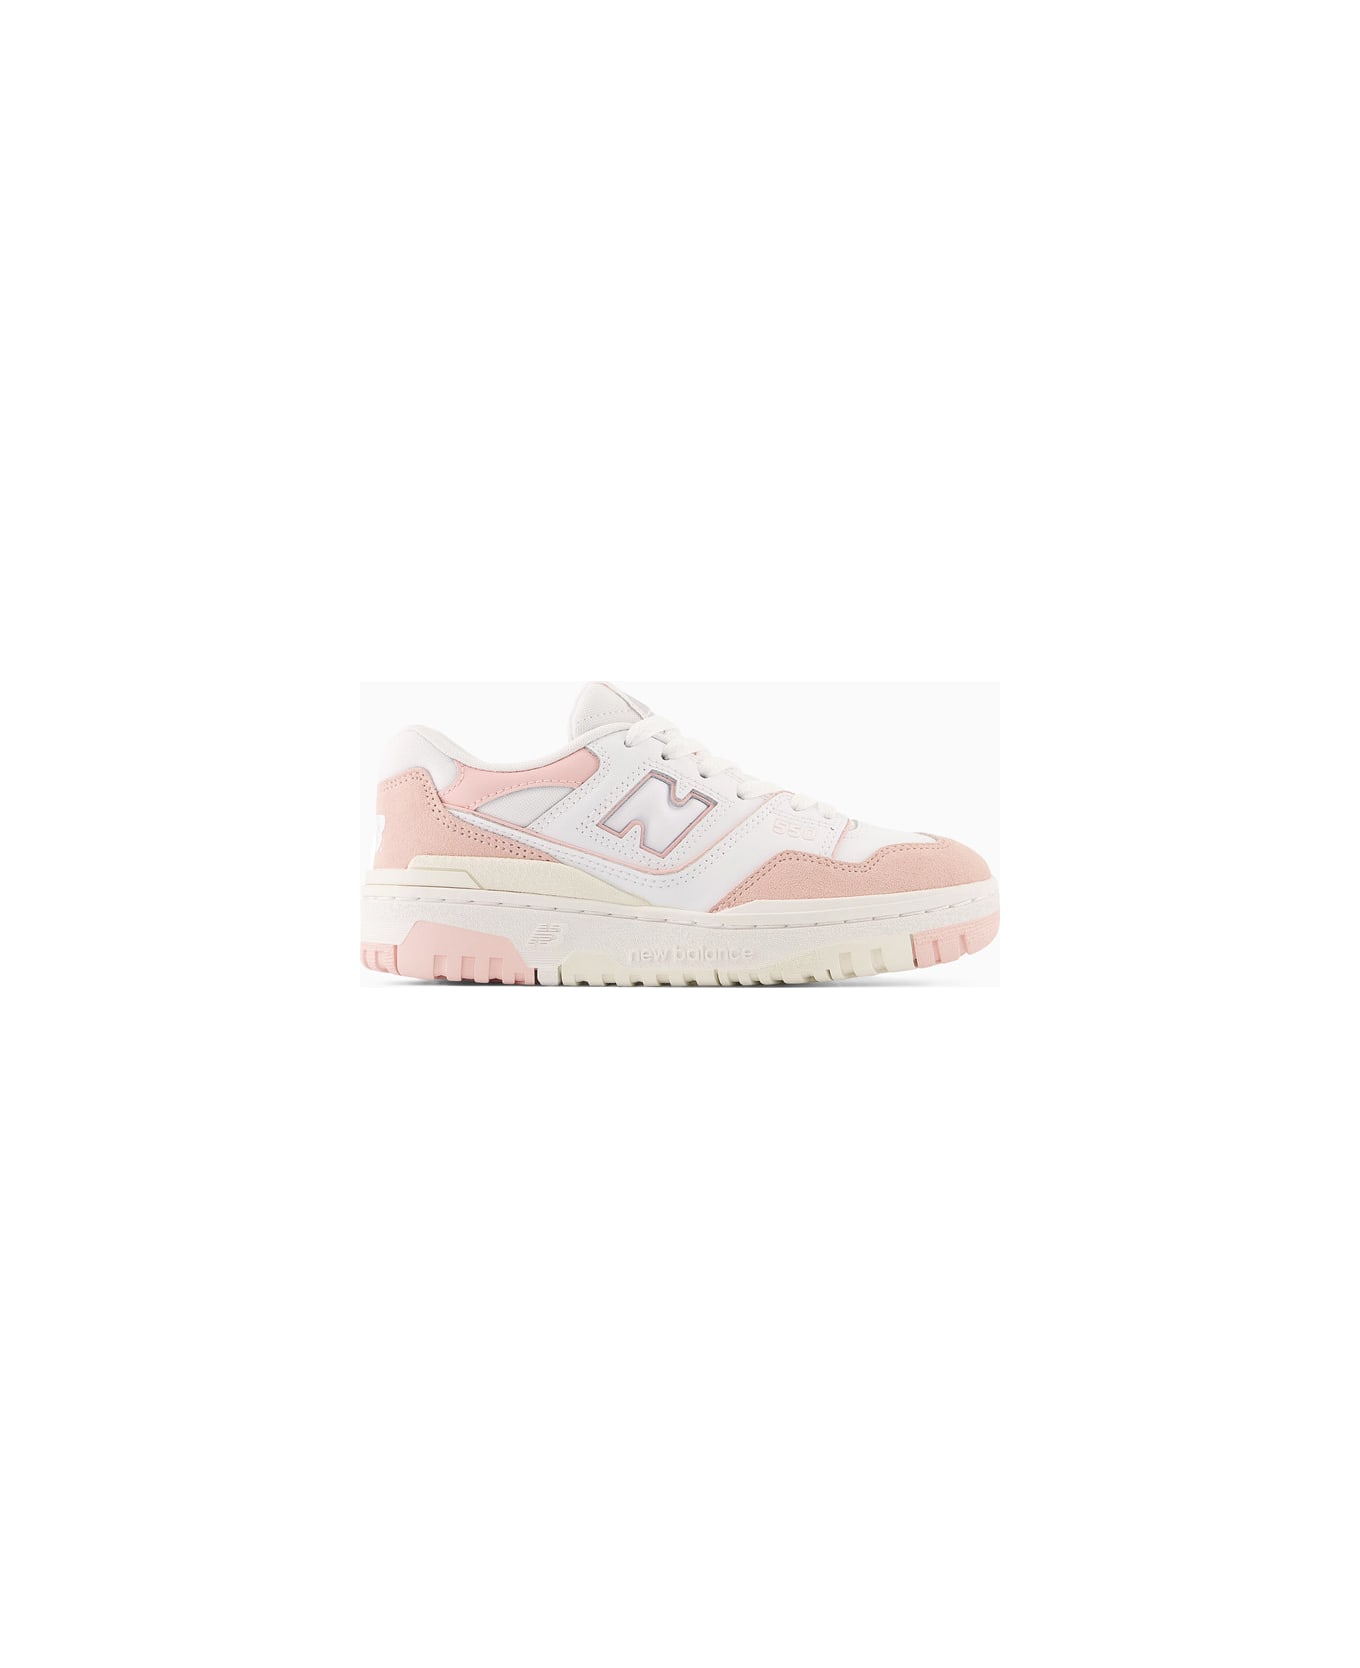 New Balance Sneakers Gsb550cd - Gs - WHITE/PINK シューズ